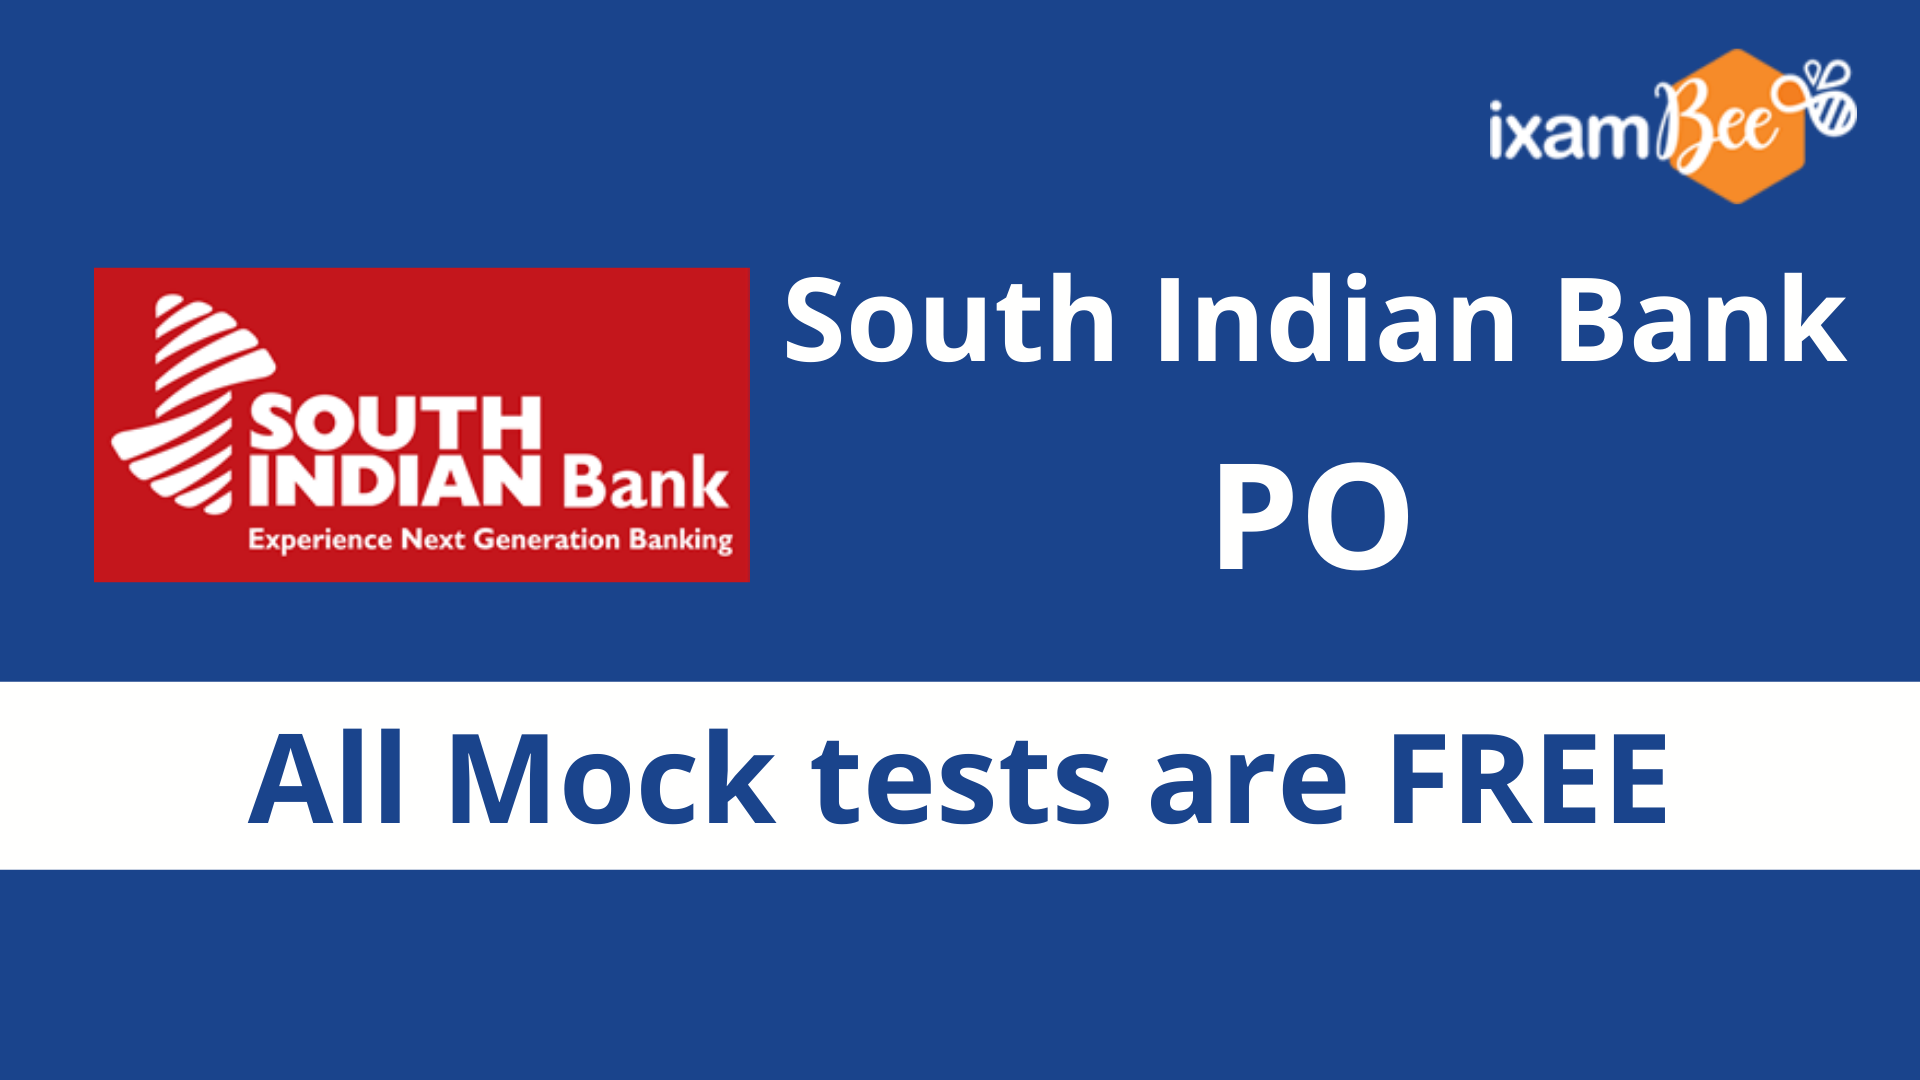 South Indian Bank PO online course